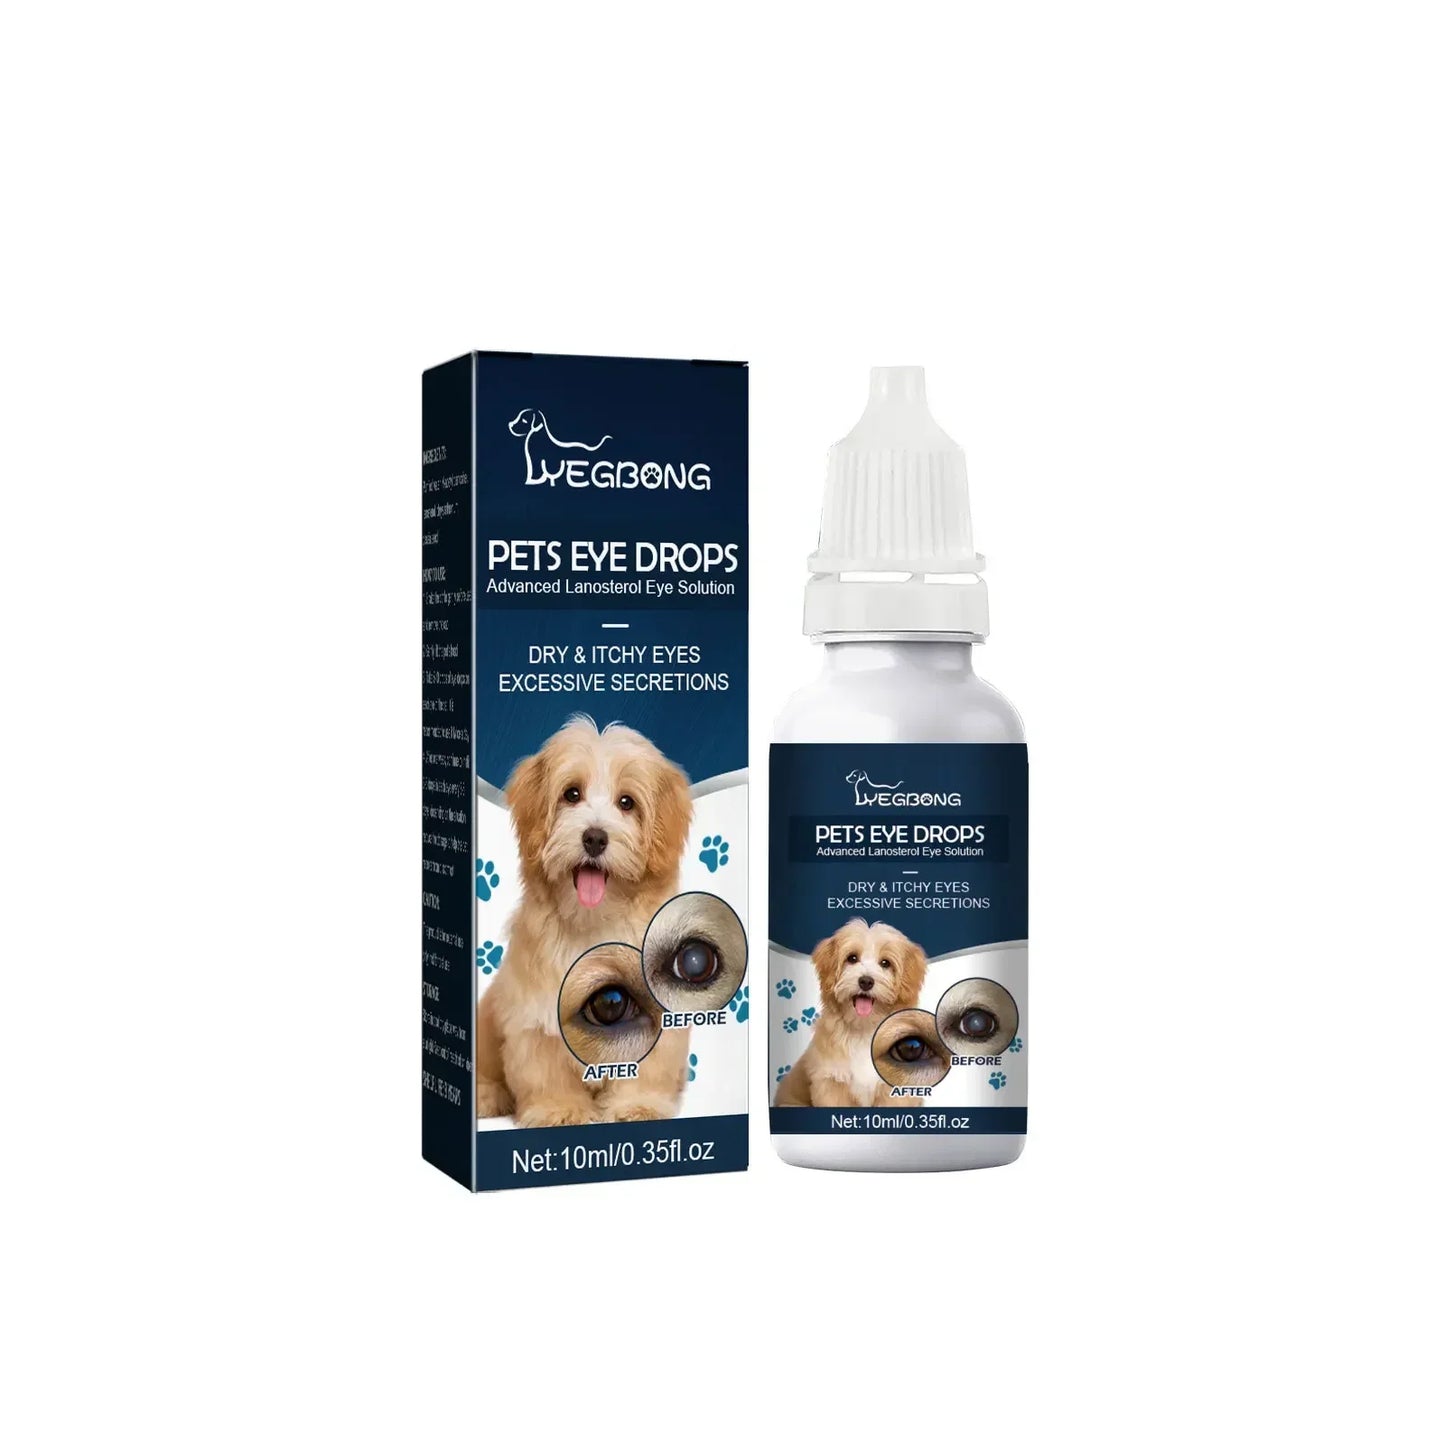 Pet Eye Drops: Removes Tear Marks, Relieves Itching